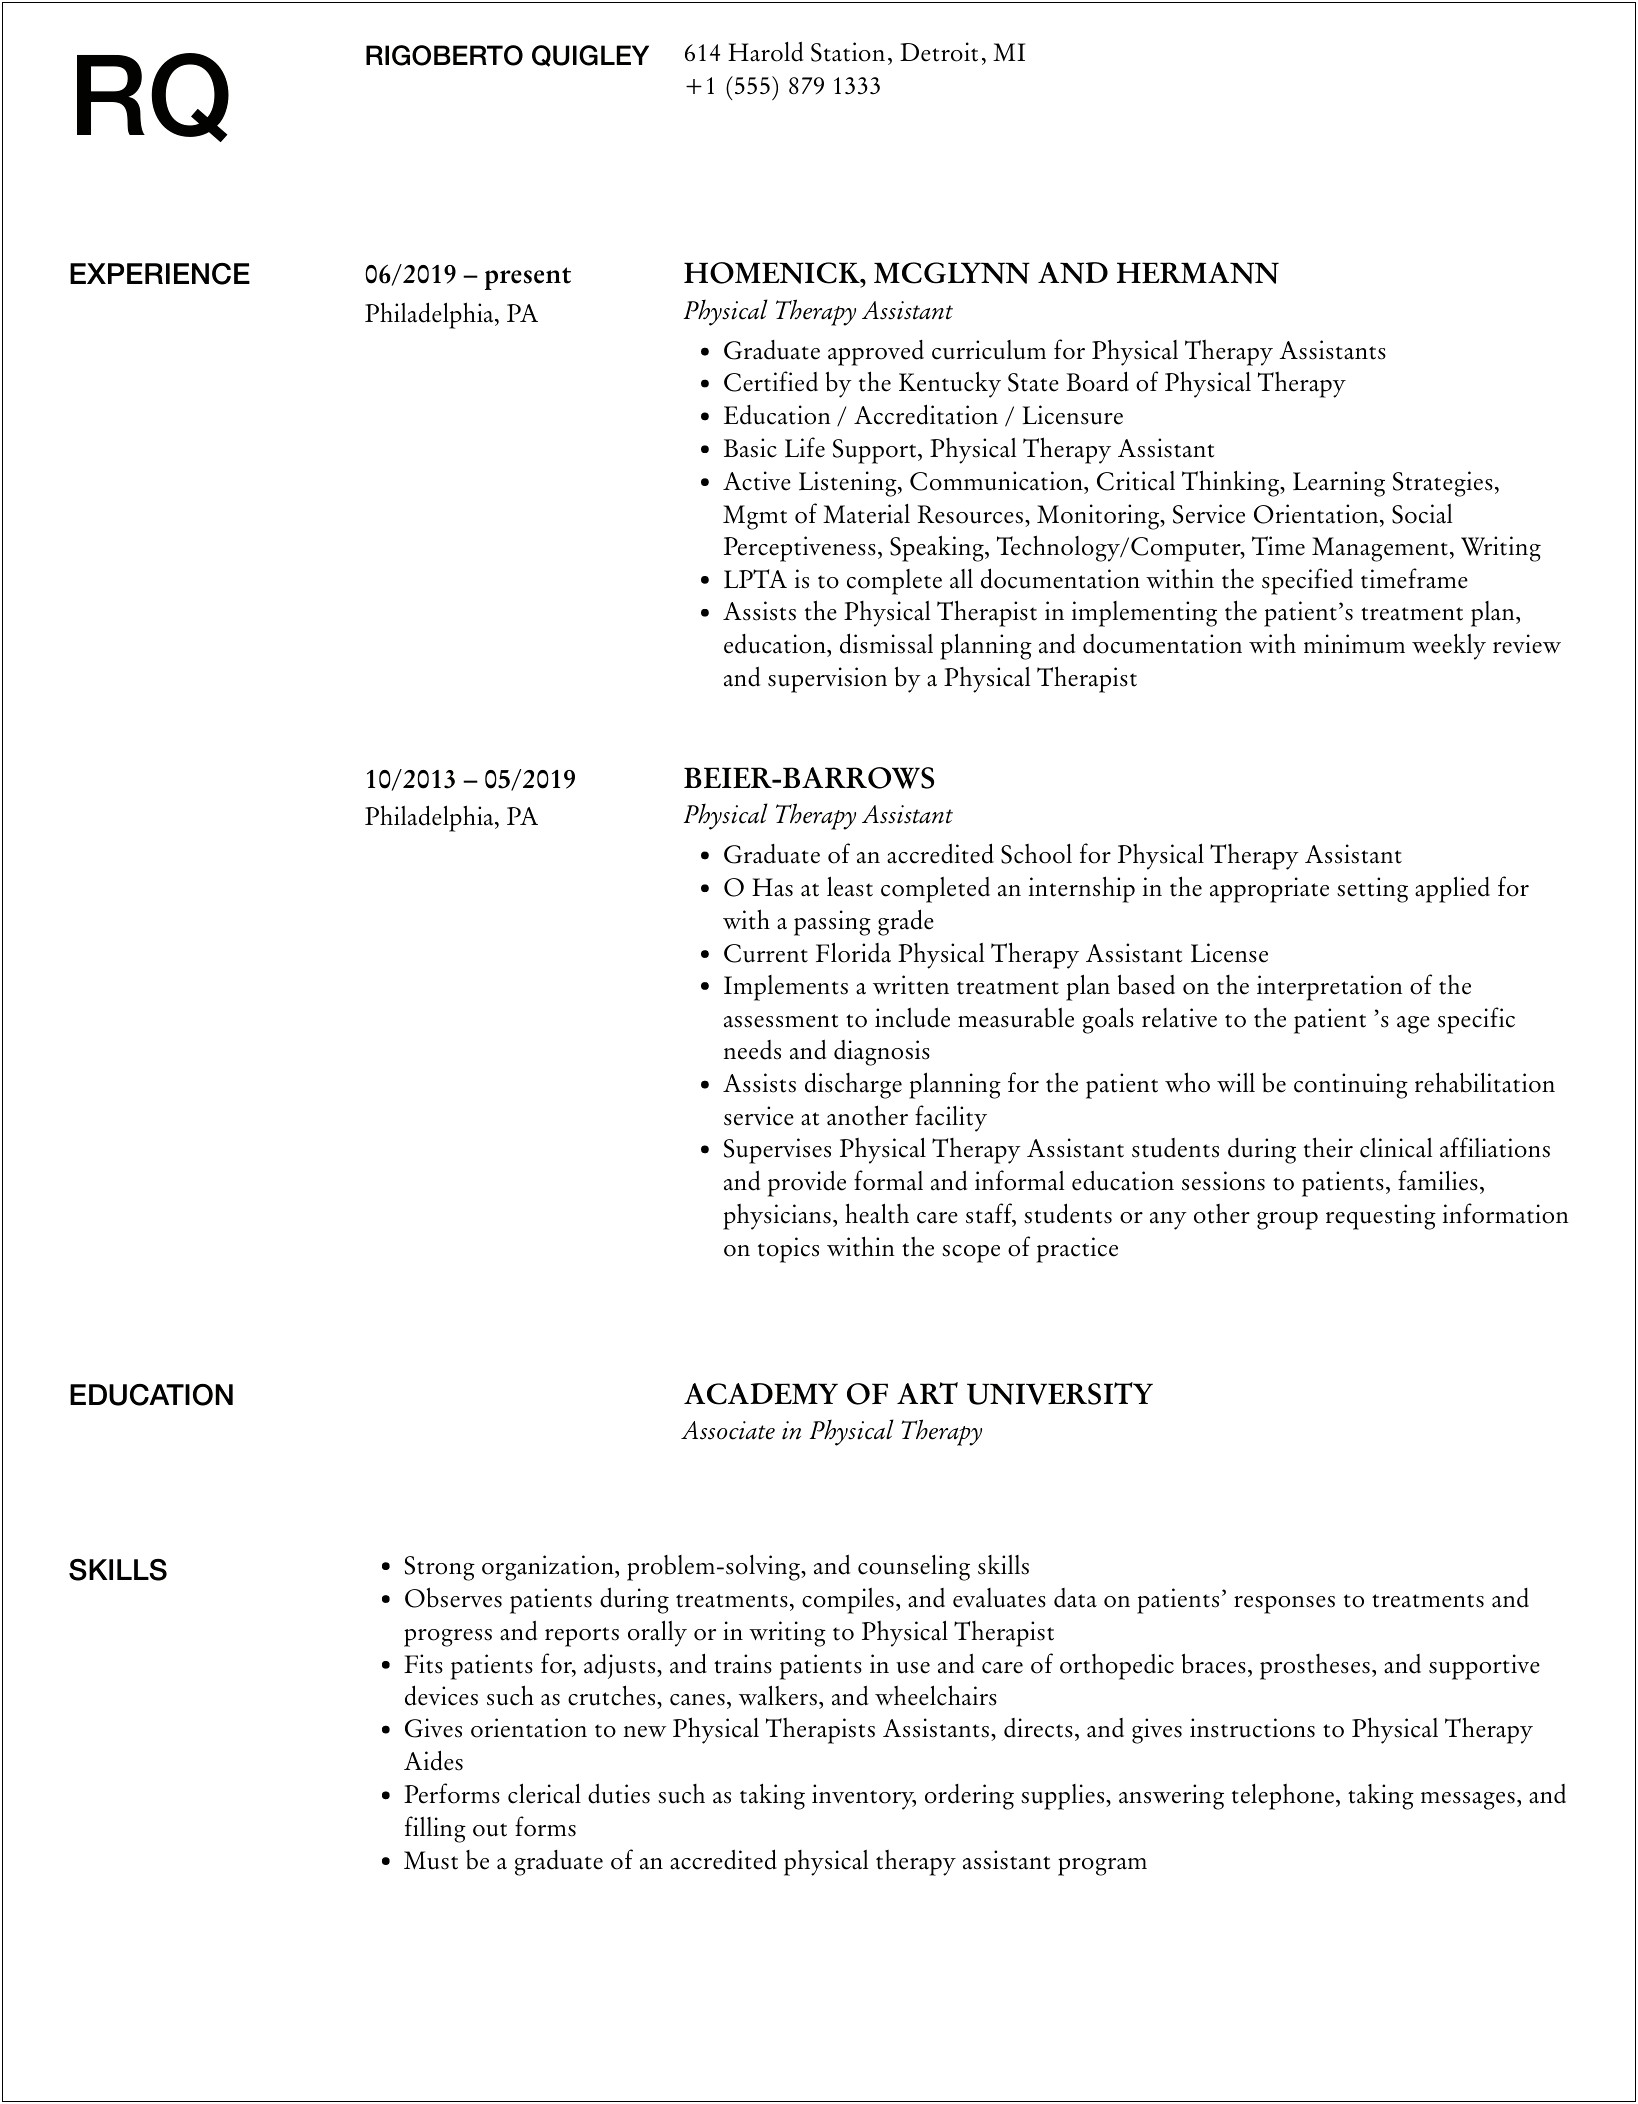 Clinical Rotation Resume Sample Physical Therapy Assistant